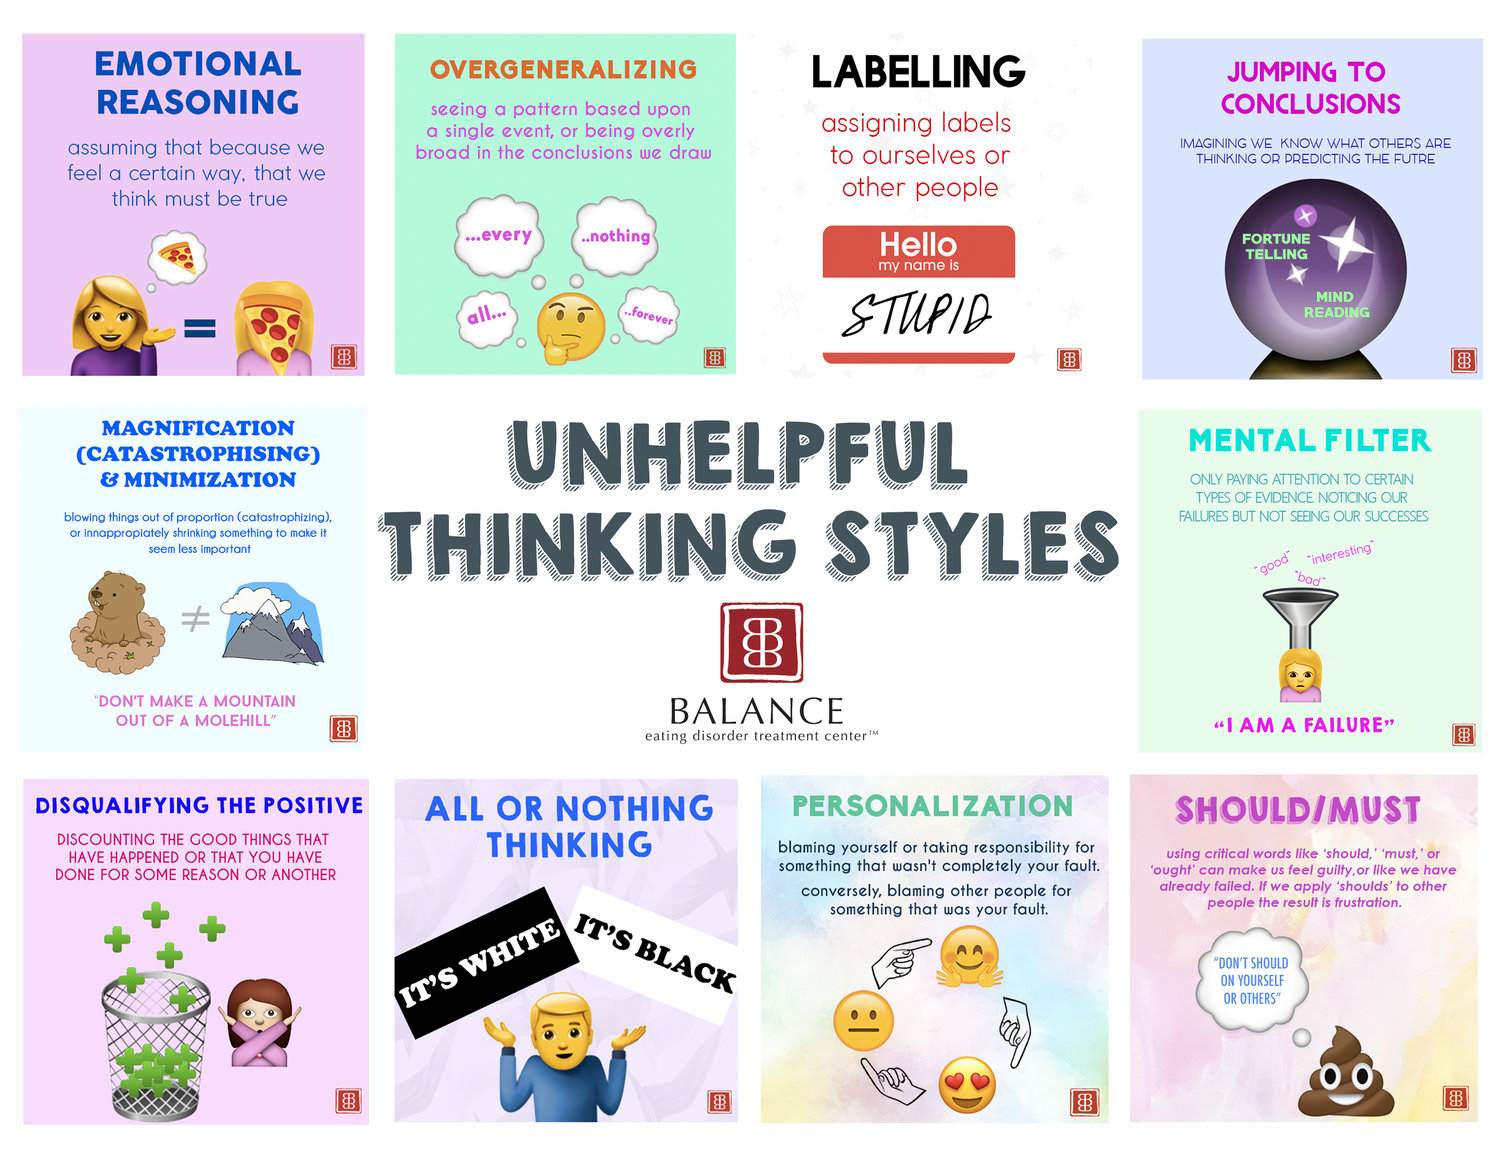 cbt-with-emojis-10-most-common-unhelpful-thinking-styles-balance